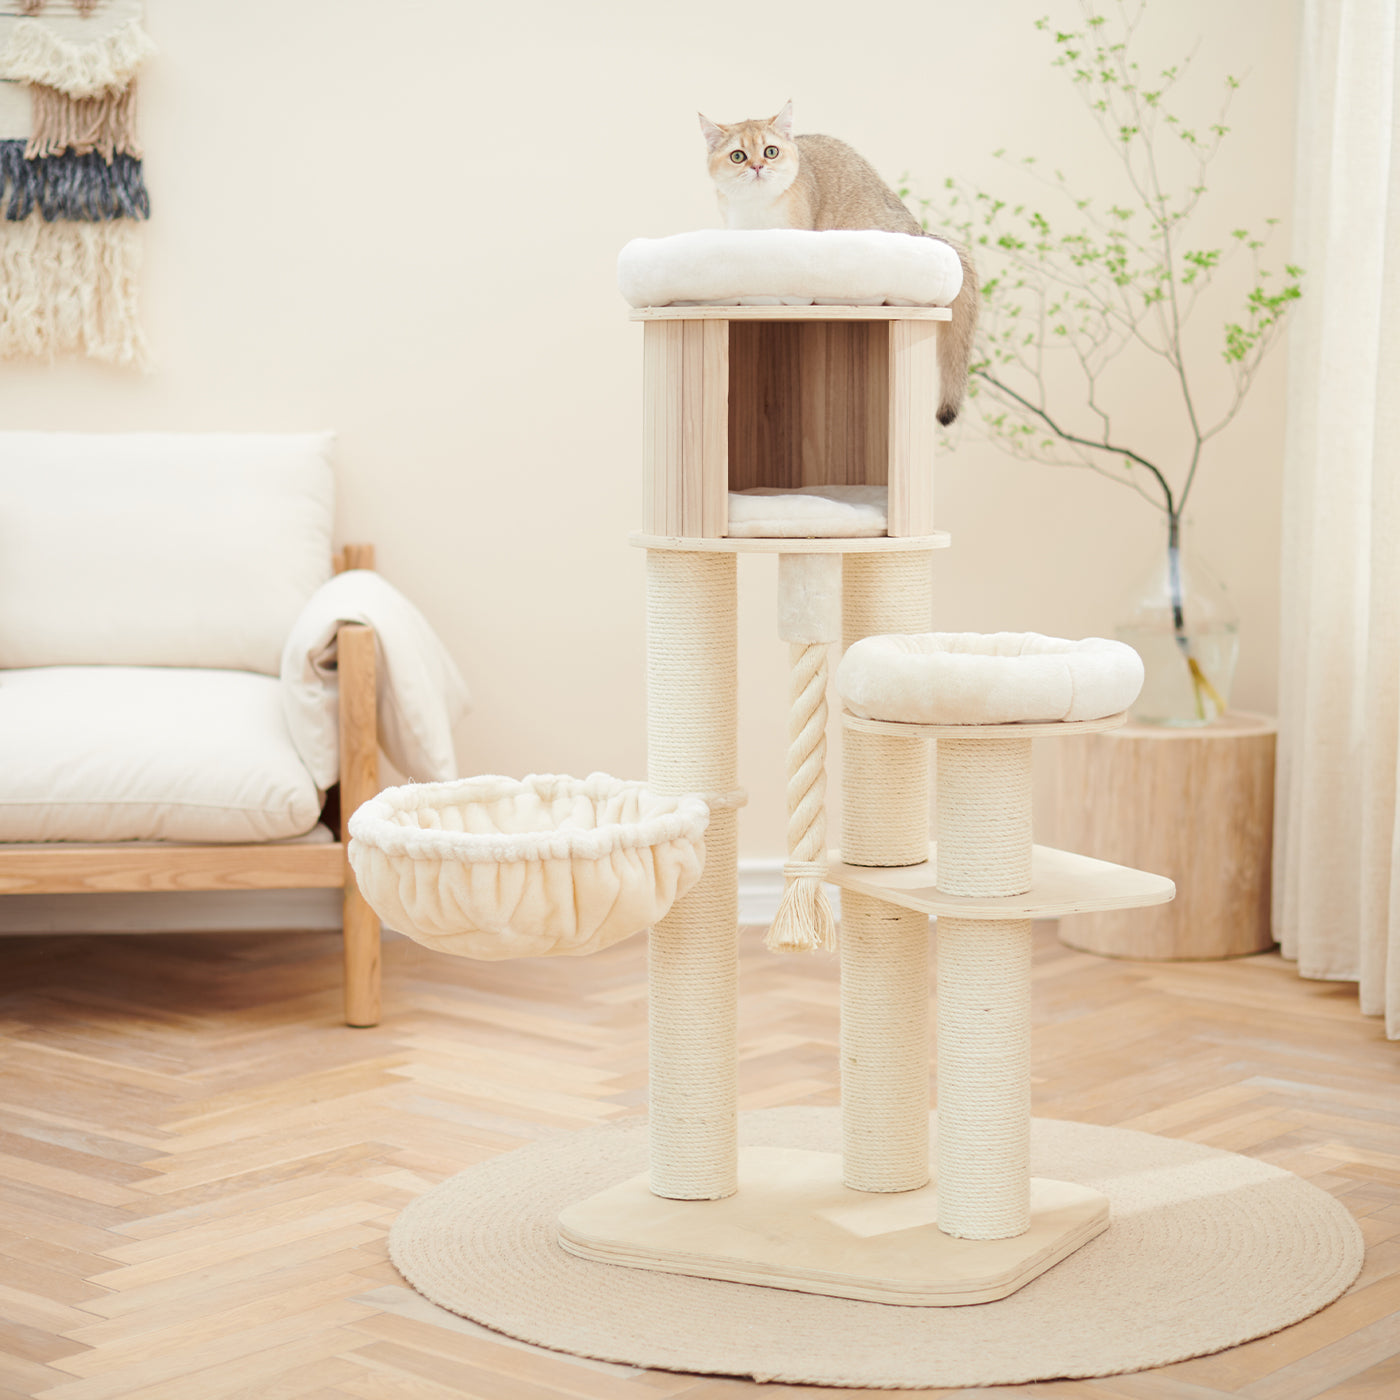 Discover our Luxury Helsinki The Loft Cat Tree. Present your cat with the perfect hideout! Crafted using durable and long-lasting wood that features multiple scratch posts for cats, hanging rope for playtime, a cosy hammock for snuggling into with multiple platforms and a den for pet burrow! Available now at Lords & Labradors